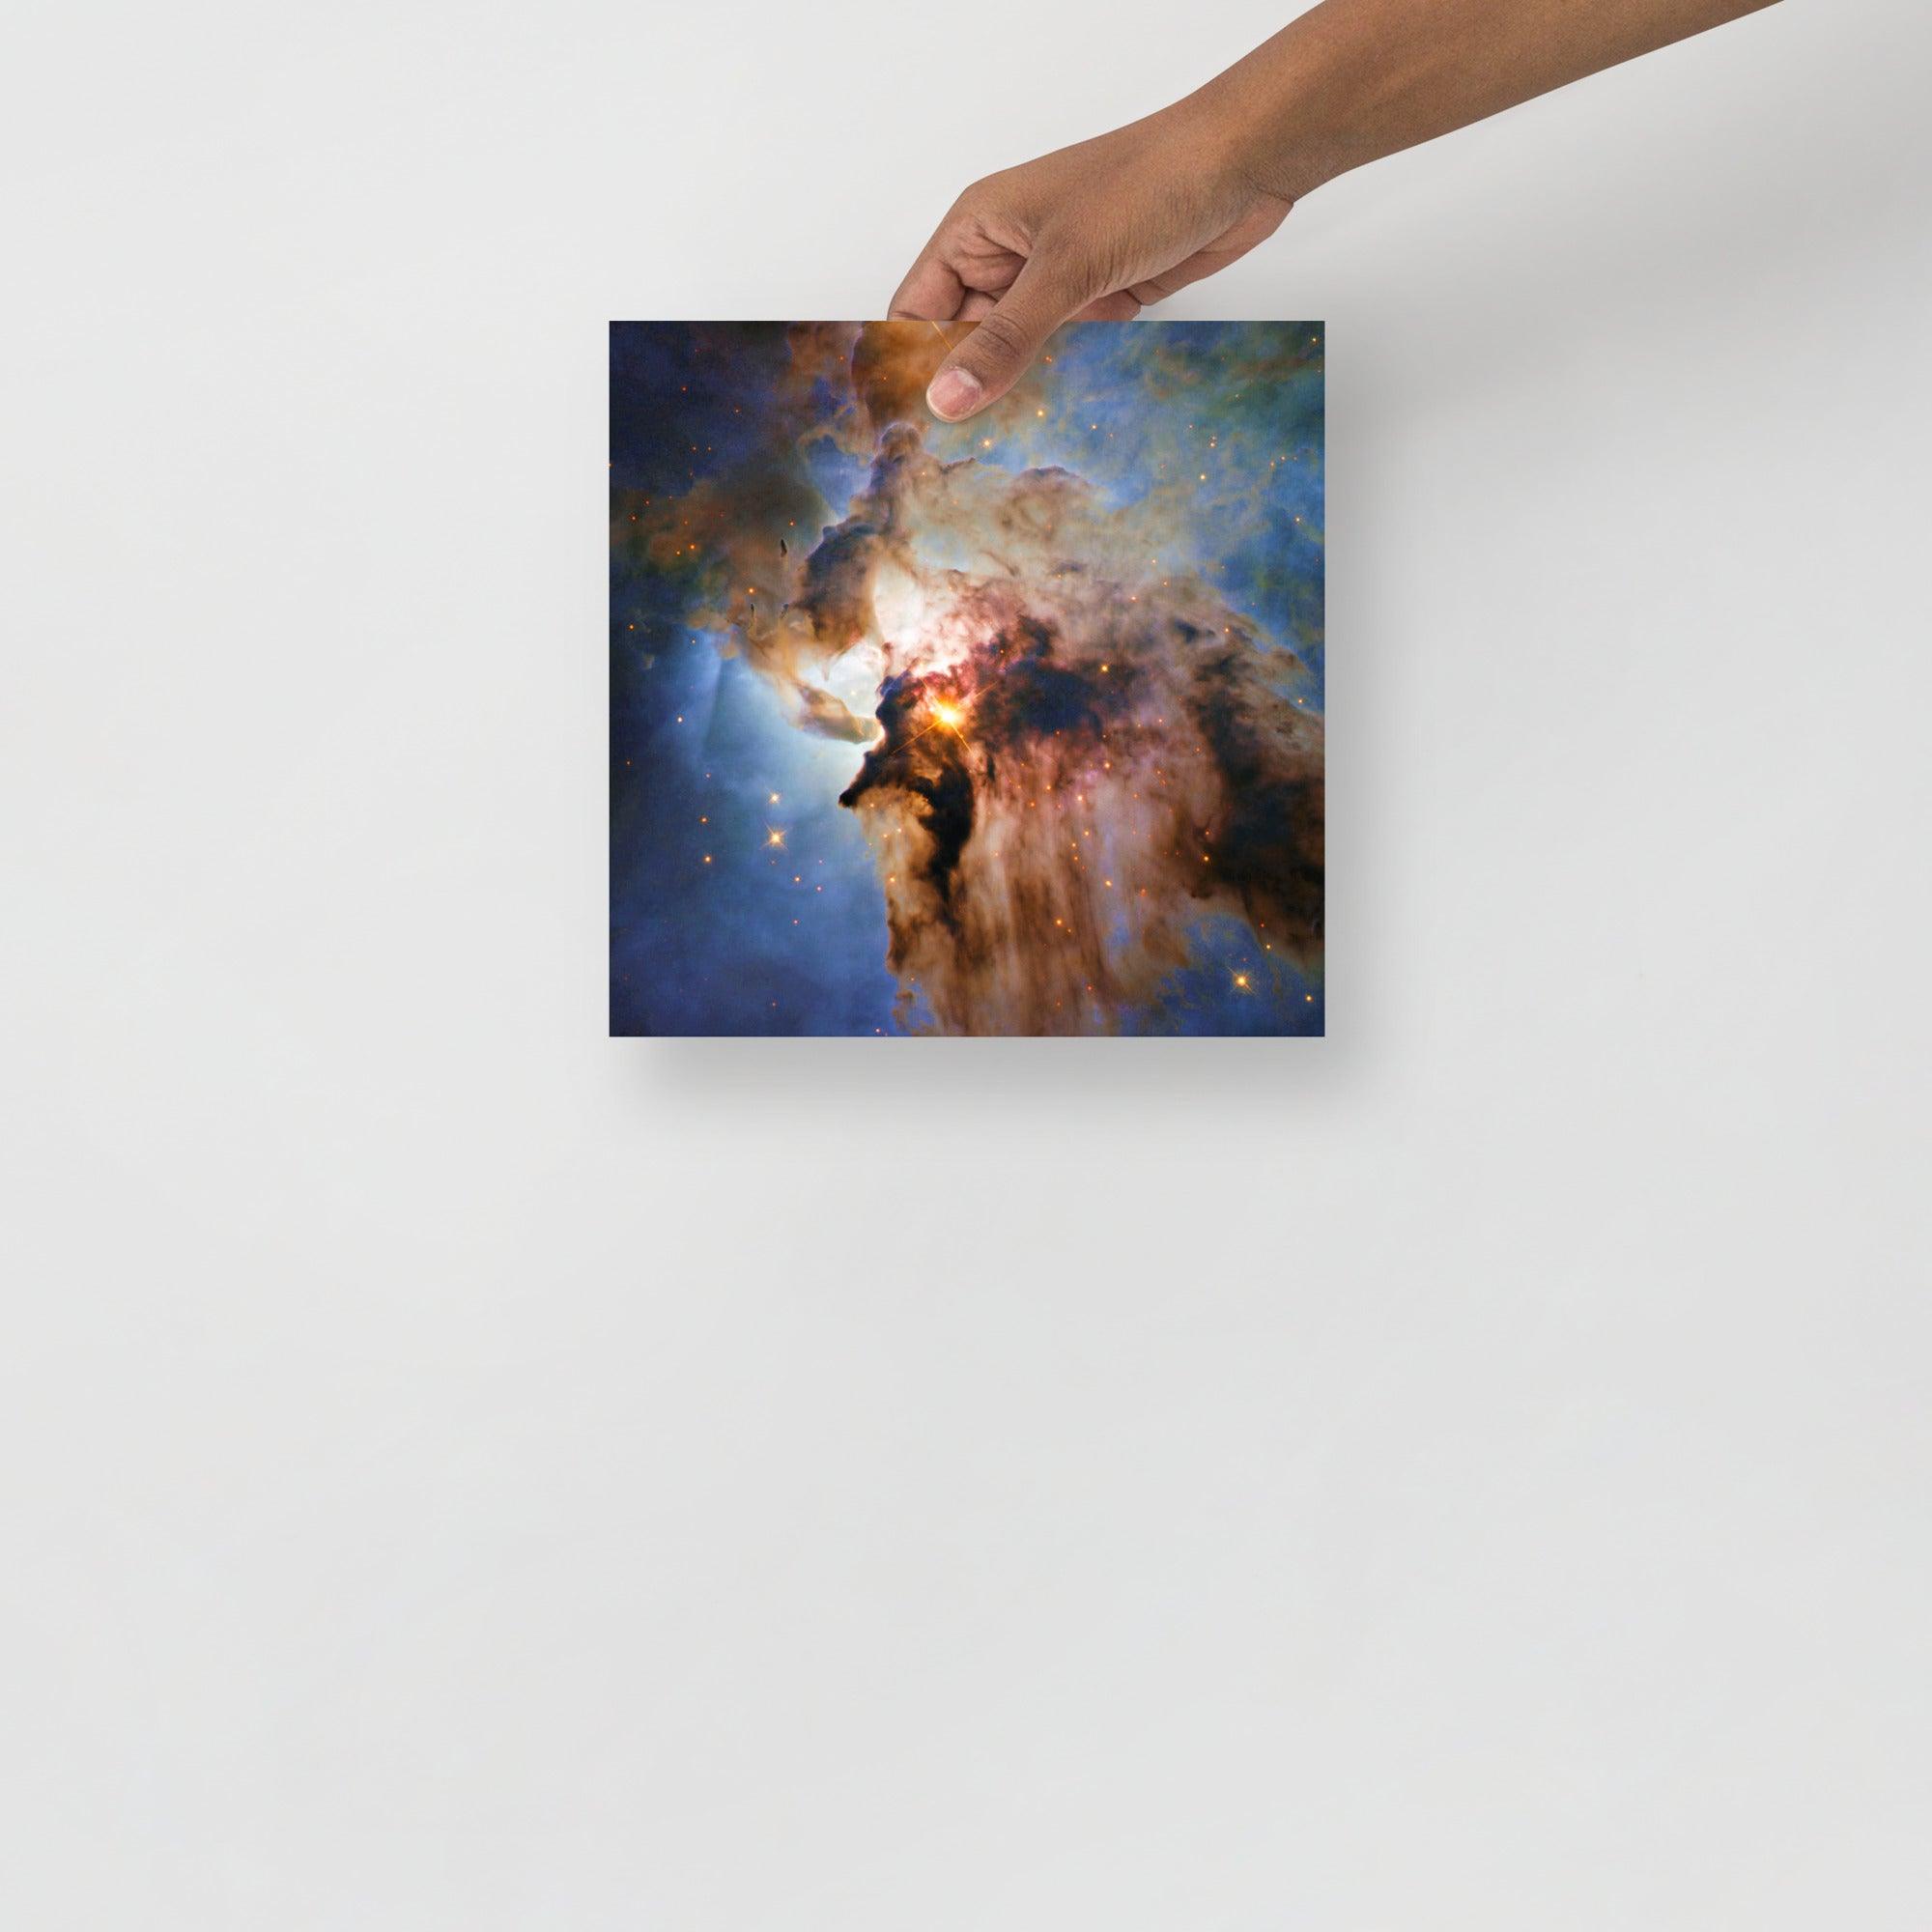 A Lagoon Nebula by Hubble Space Telescope poster on a plain backdrop in size 10x10”.